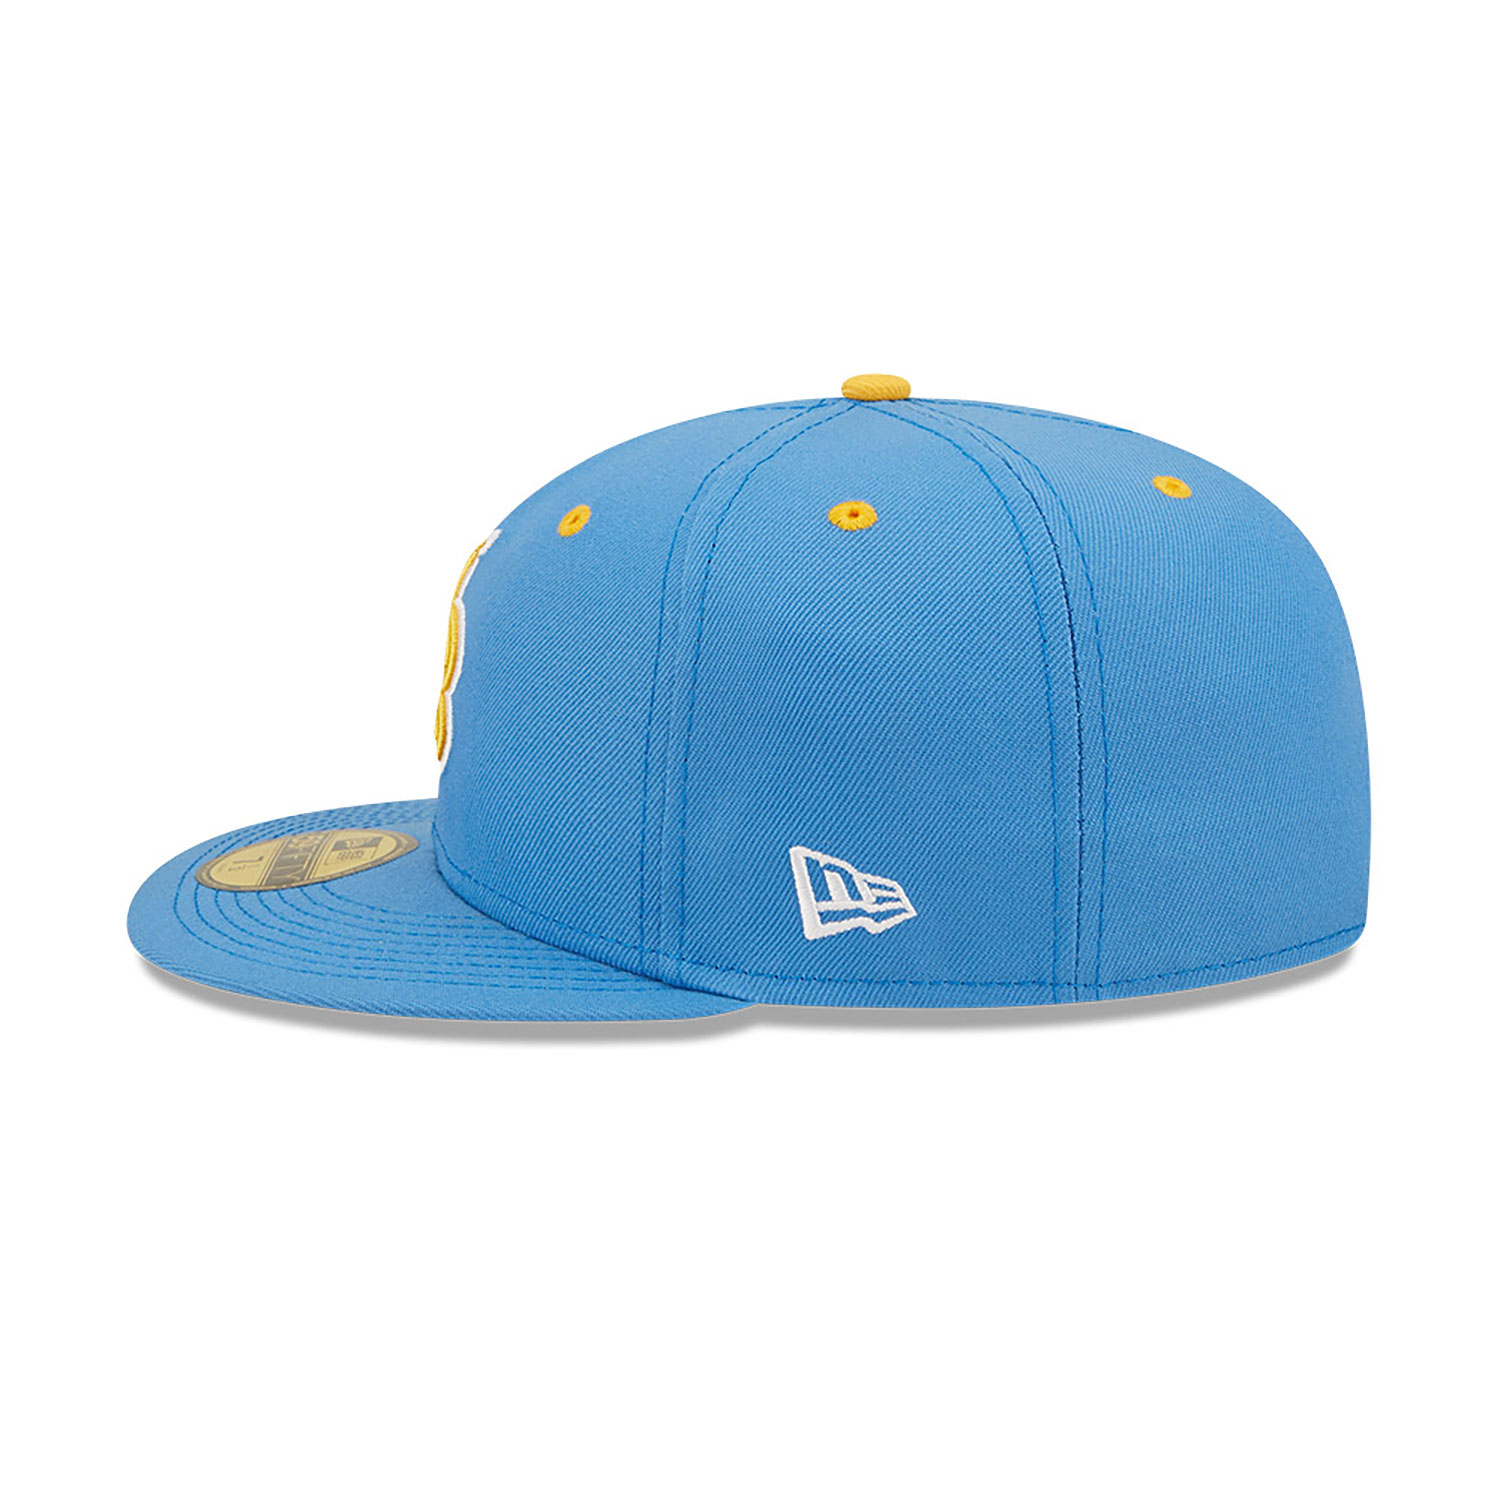 Myrtle Beach Pelicans MiLB On Field Blue 59FIFTY Fitted Cap